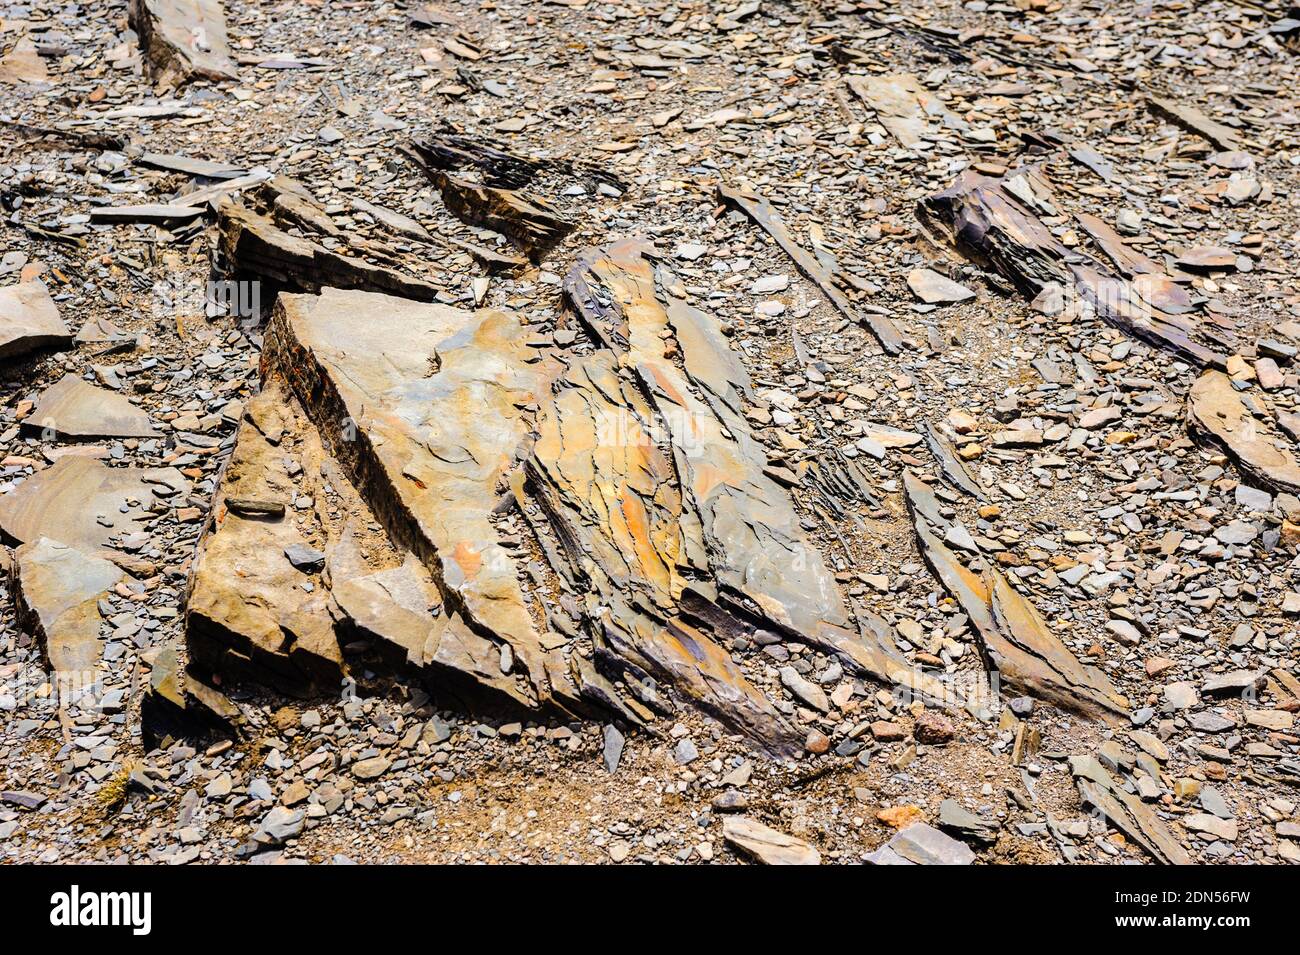 Close-up of layered rocks and gravel on ground. Stock Photo